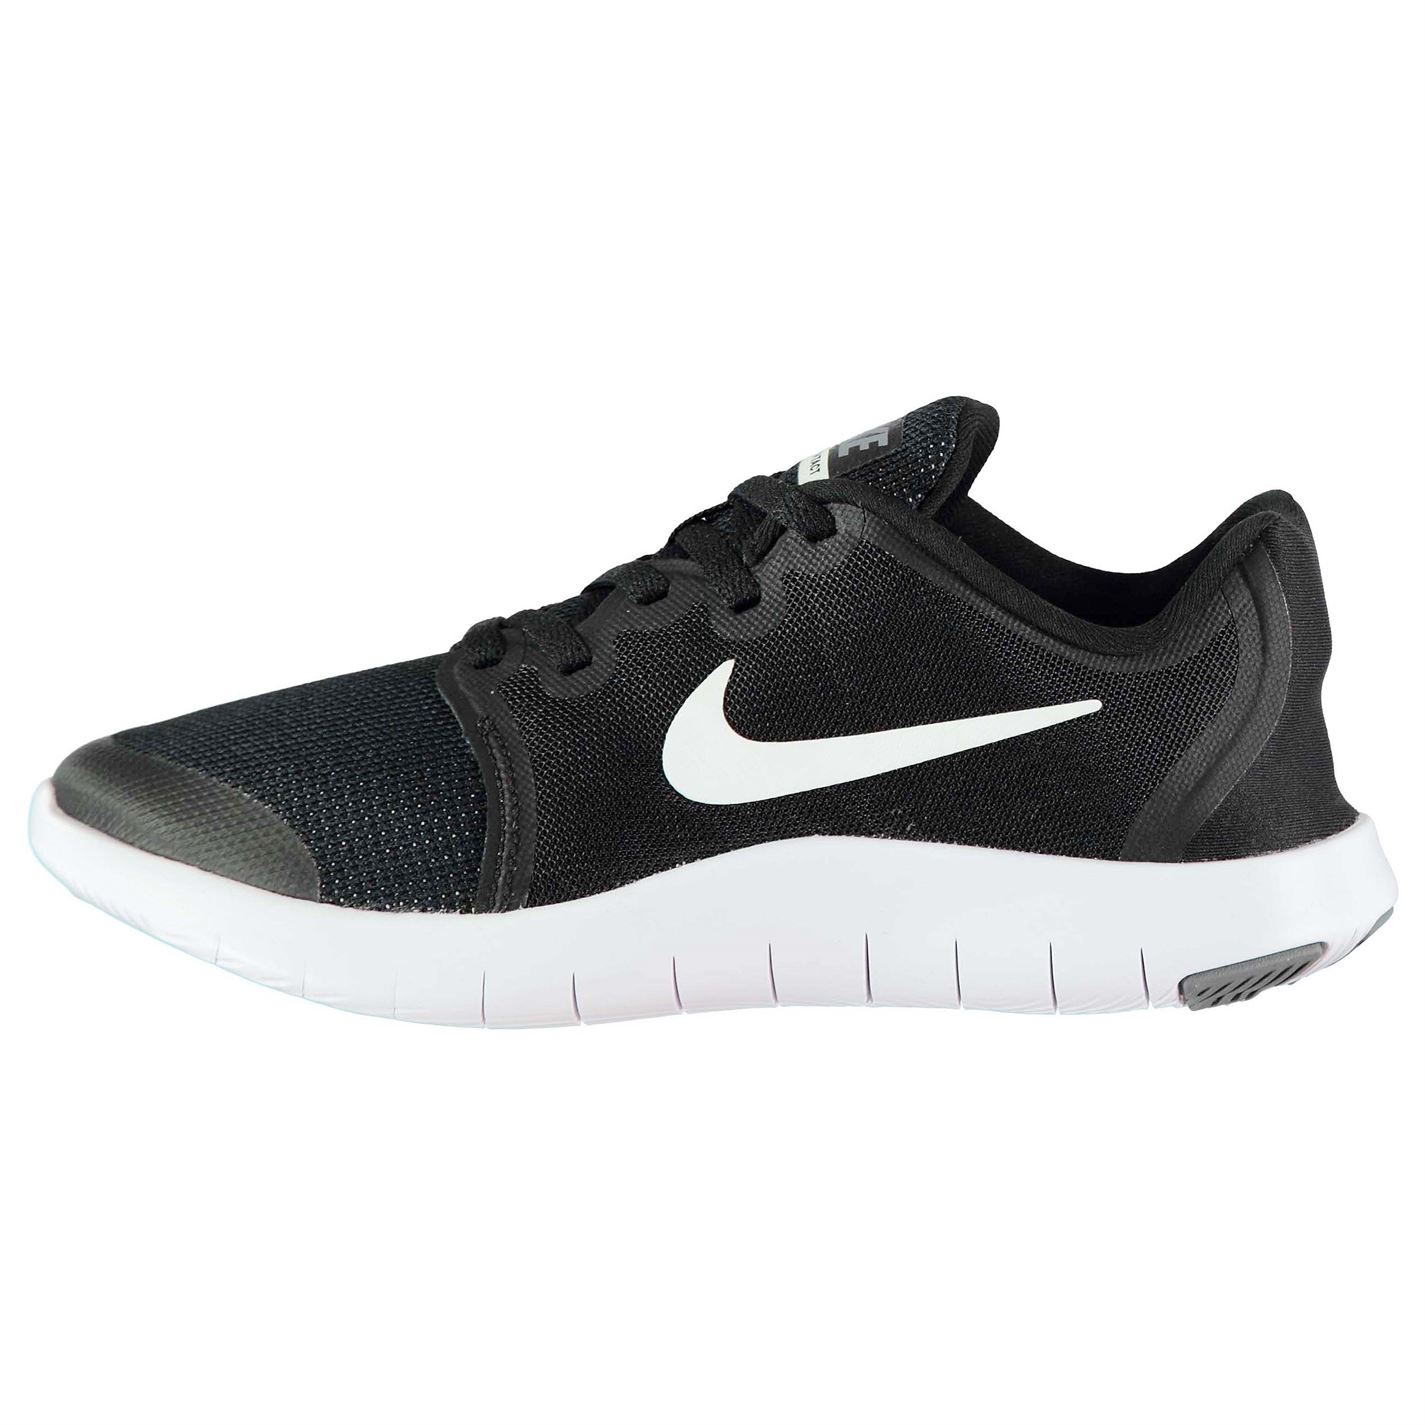 nike flex contact 2 trainers infant boys